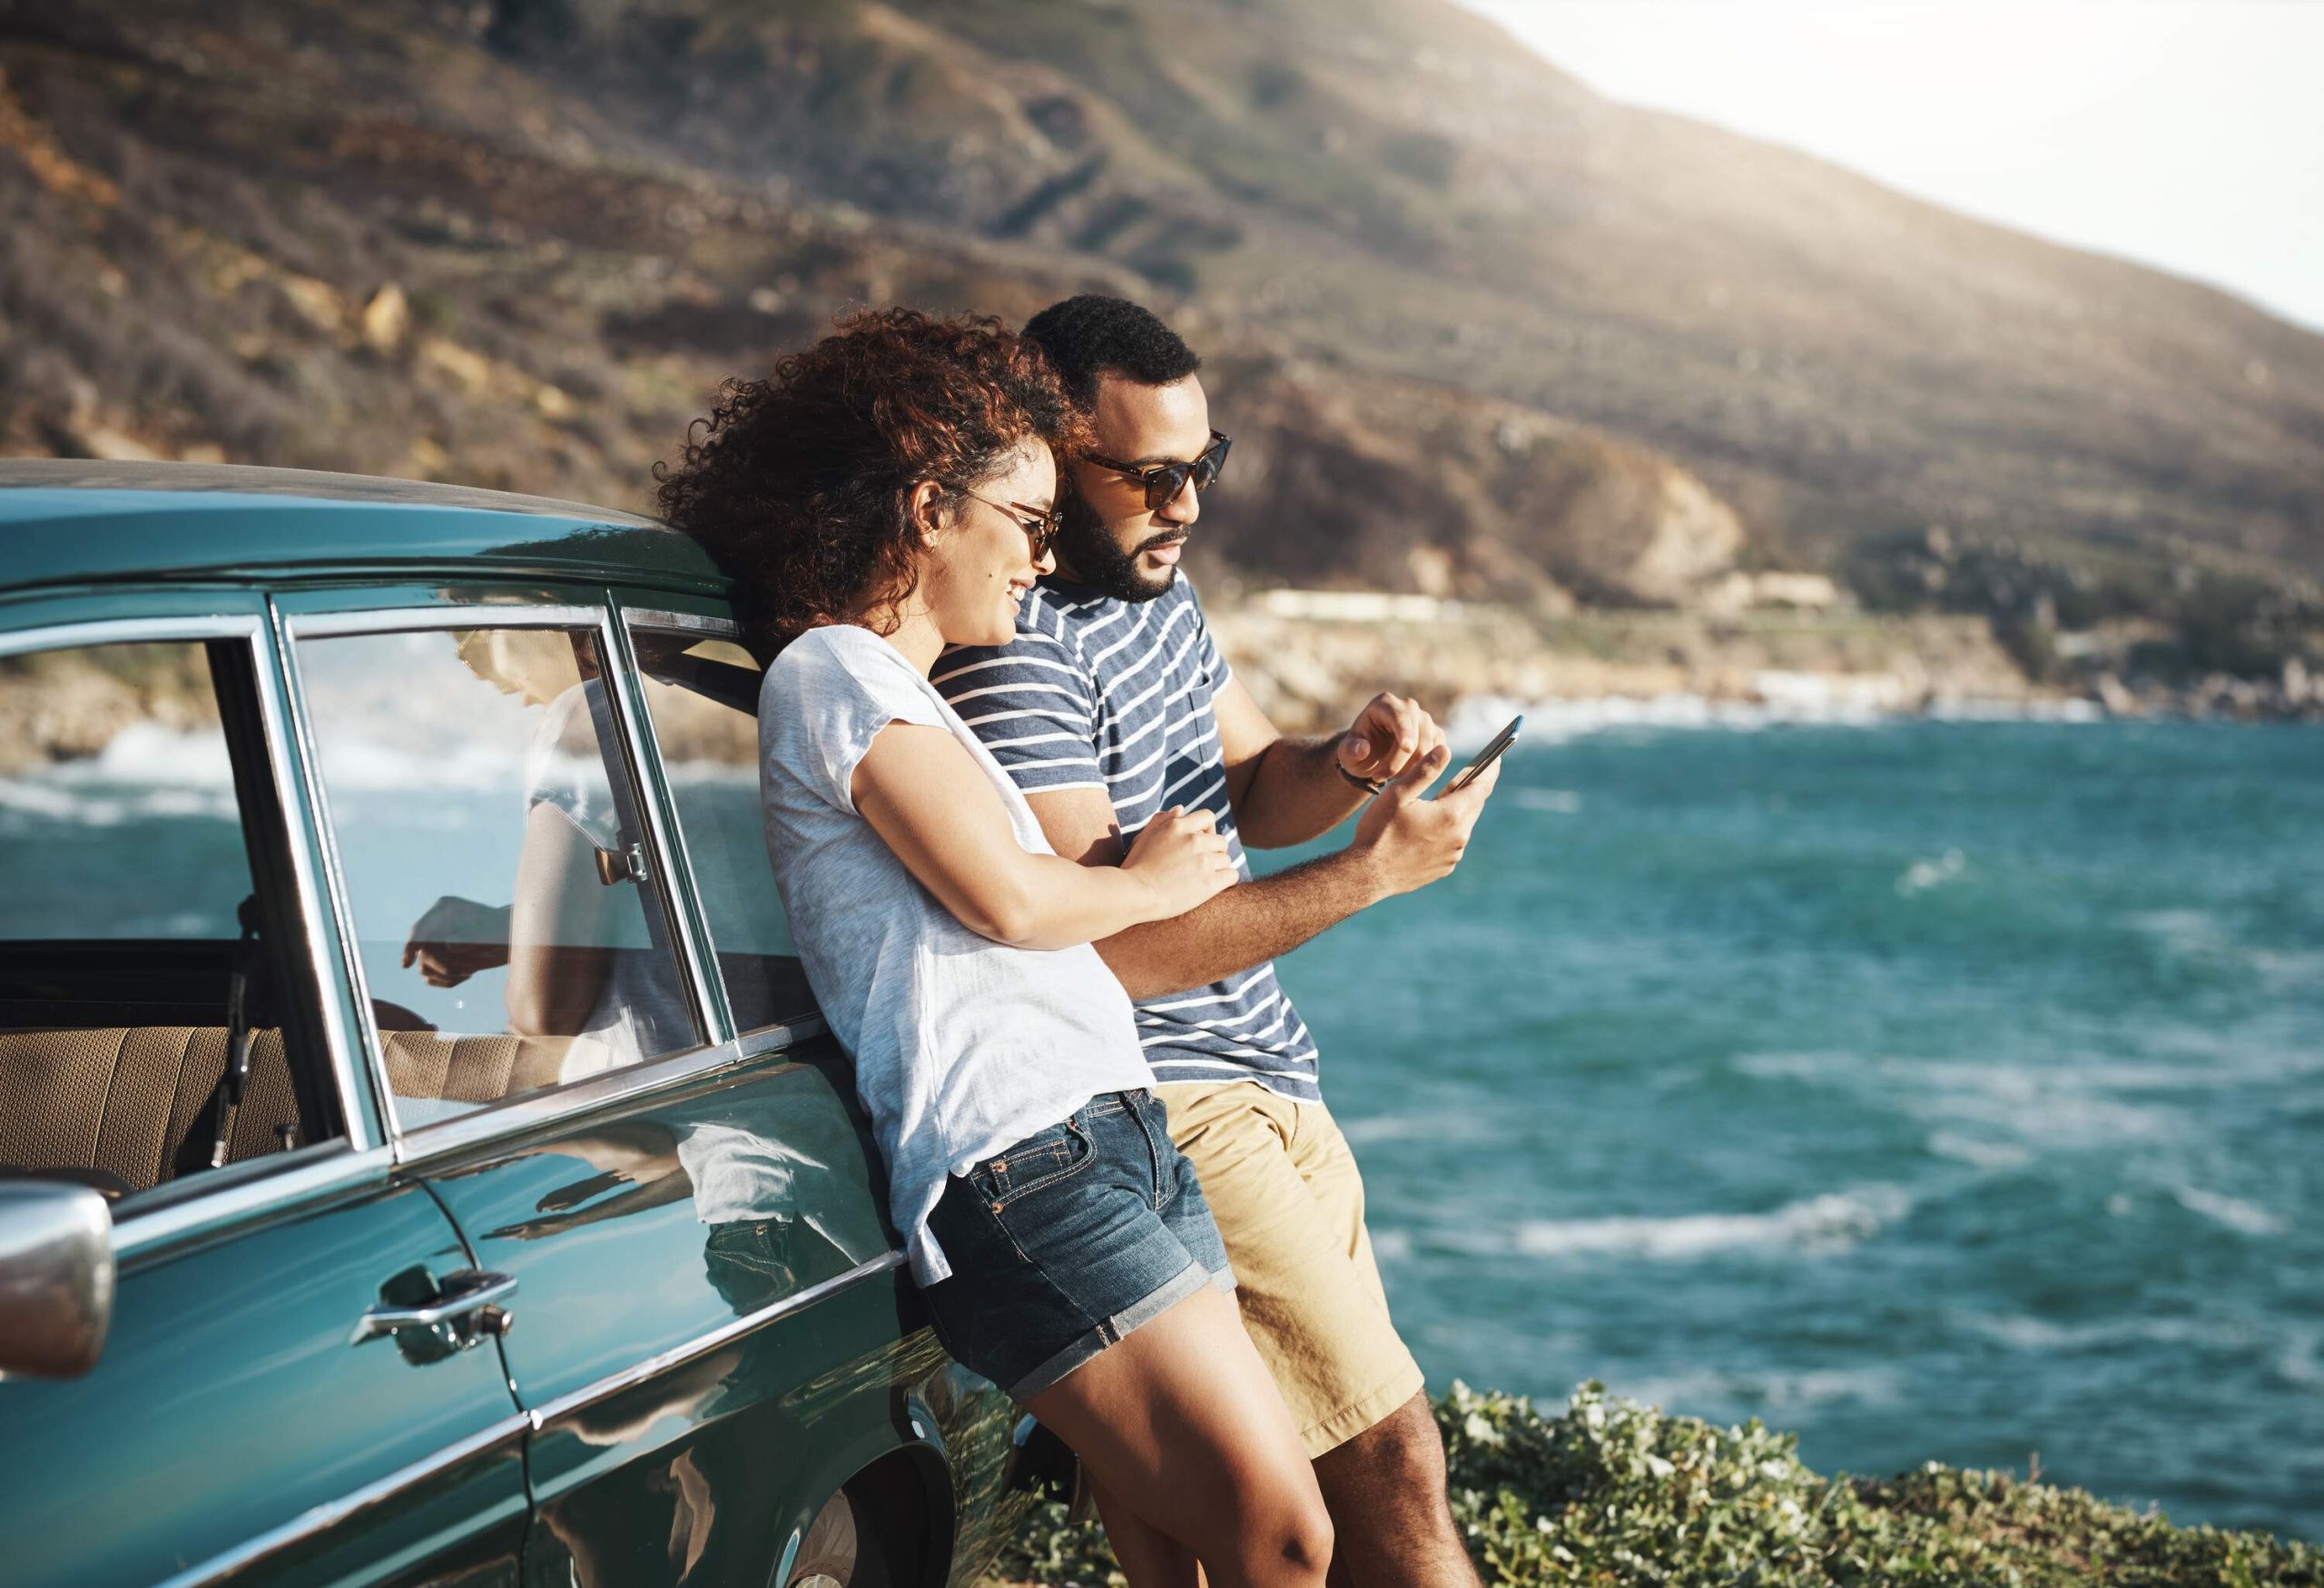 Two people standing next to a car and looking at a smartphone